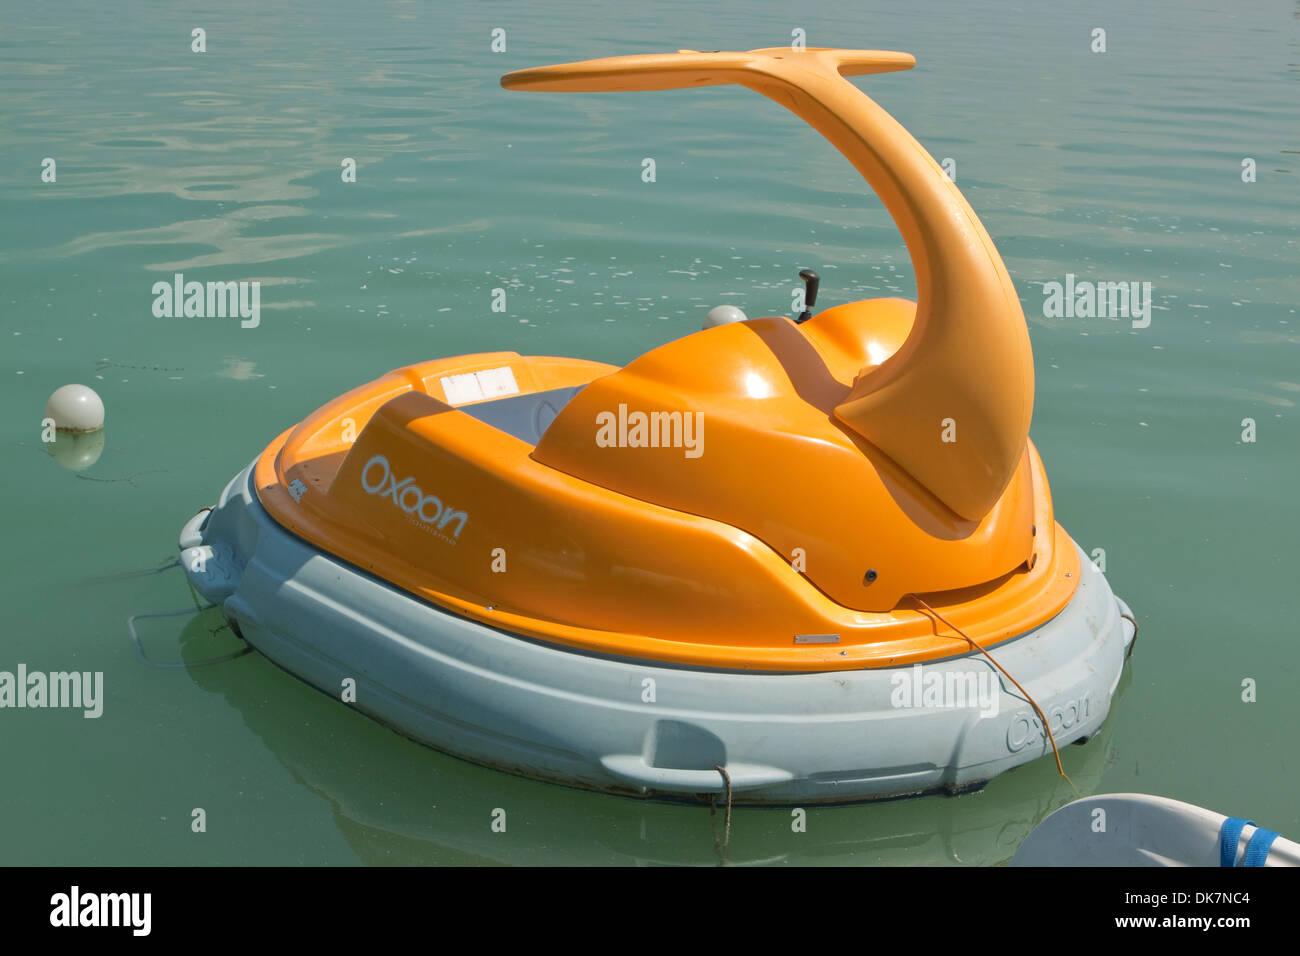 Oxoon Jet Boat Water Buggy Stock Photo